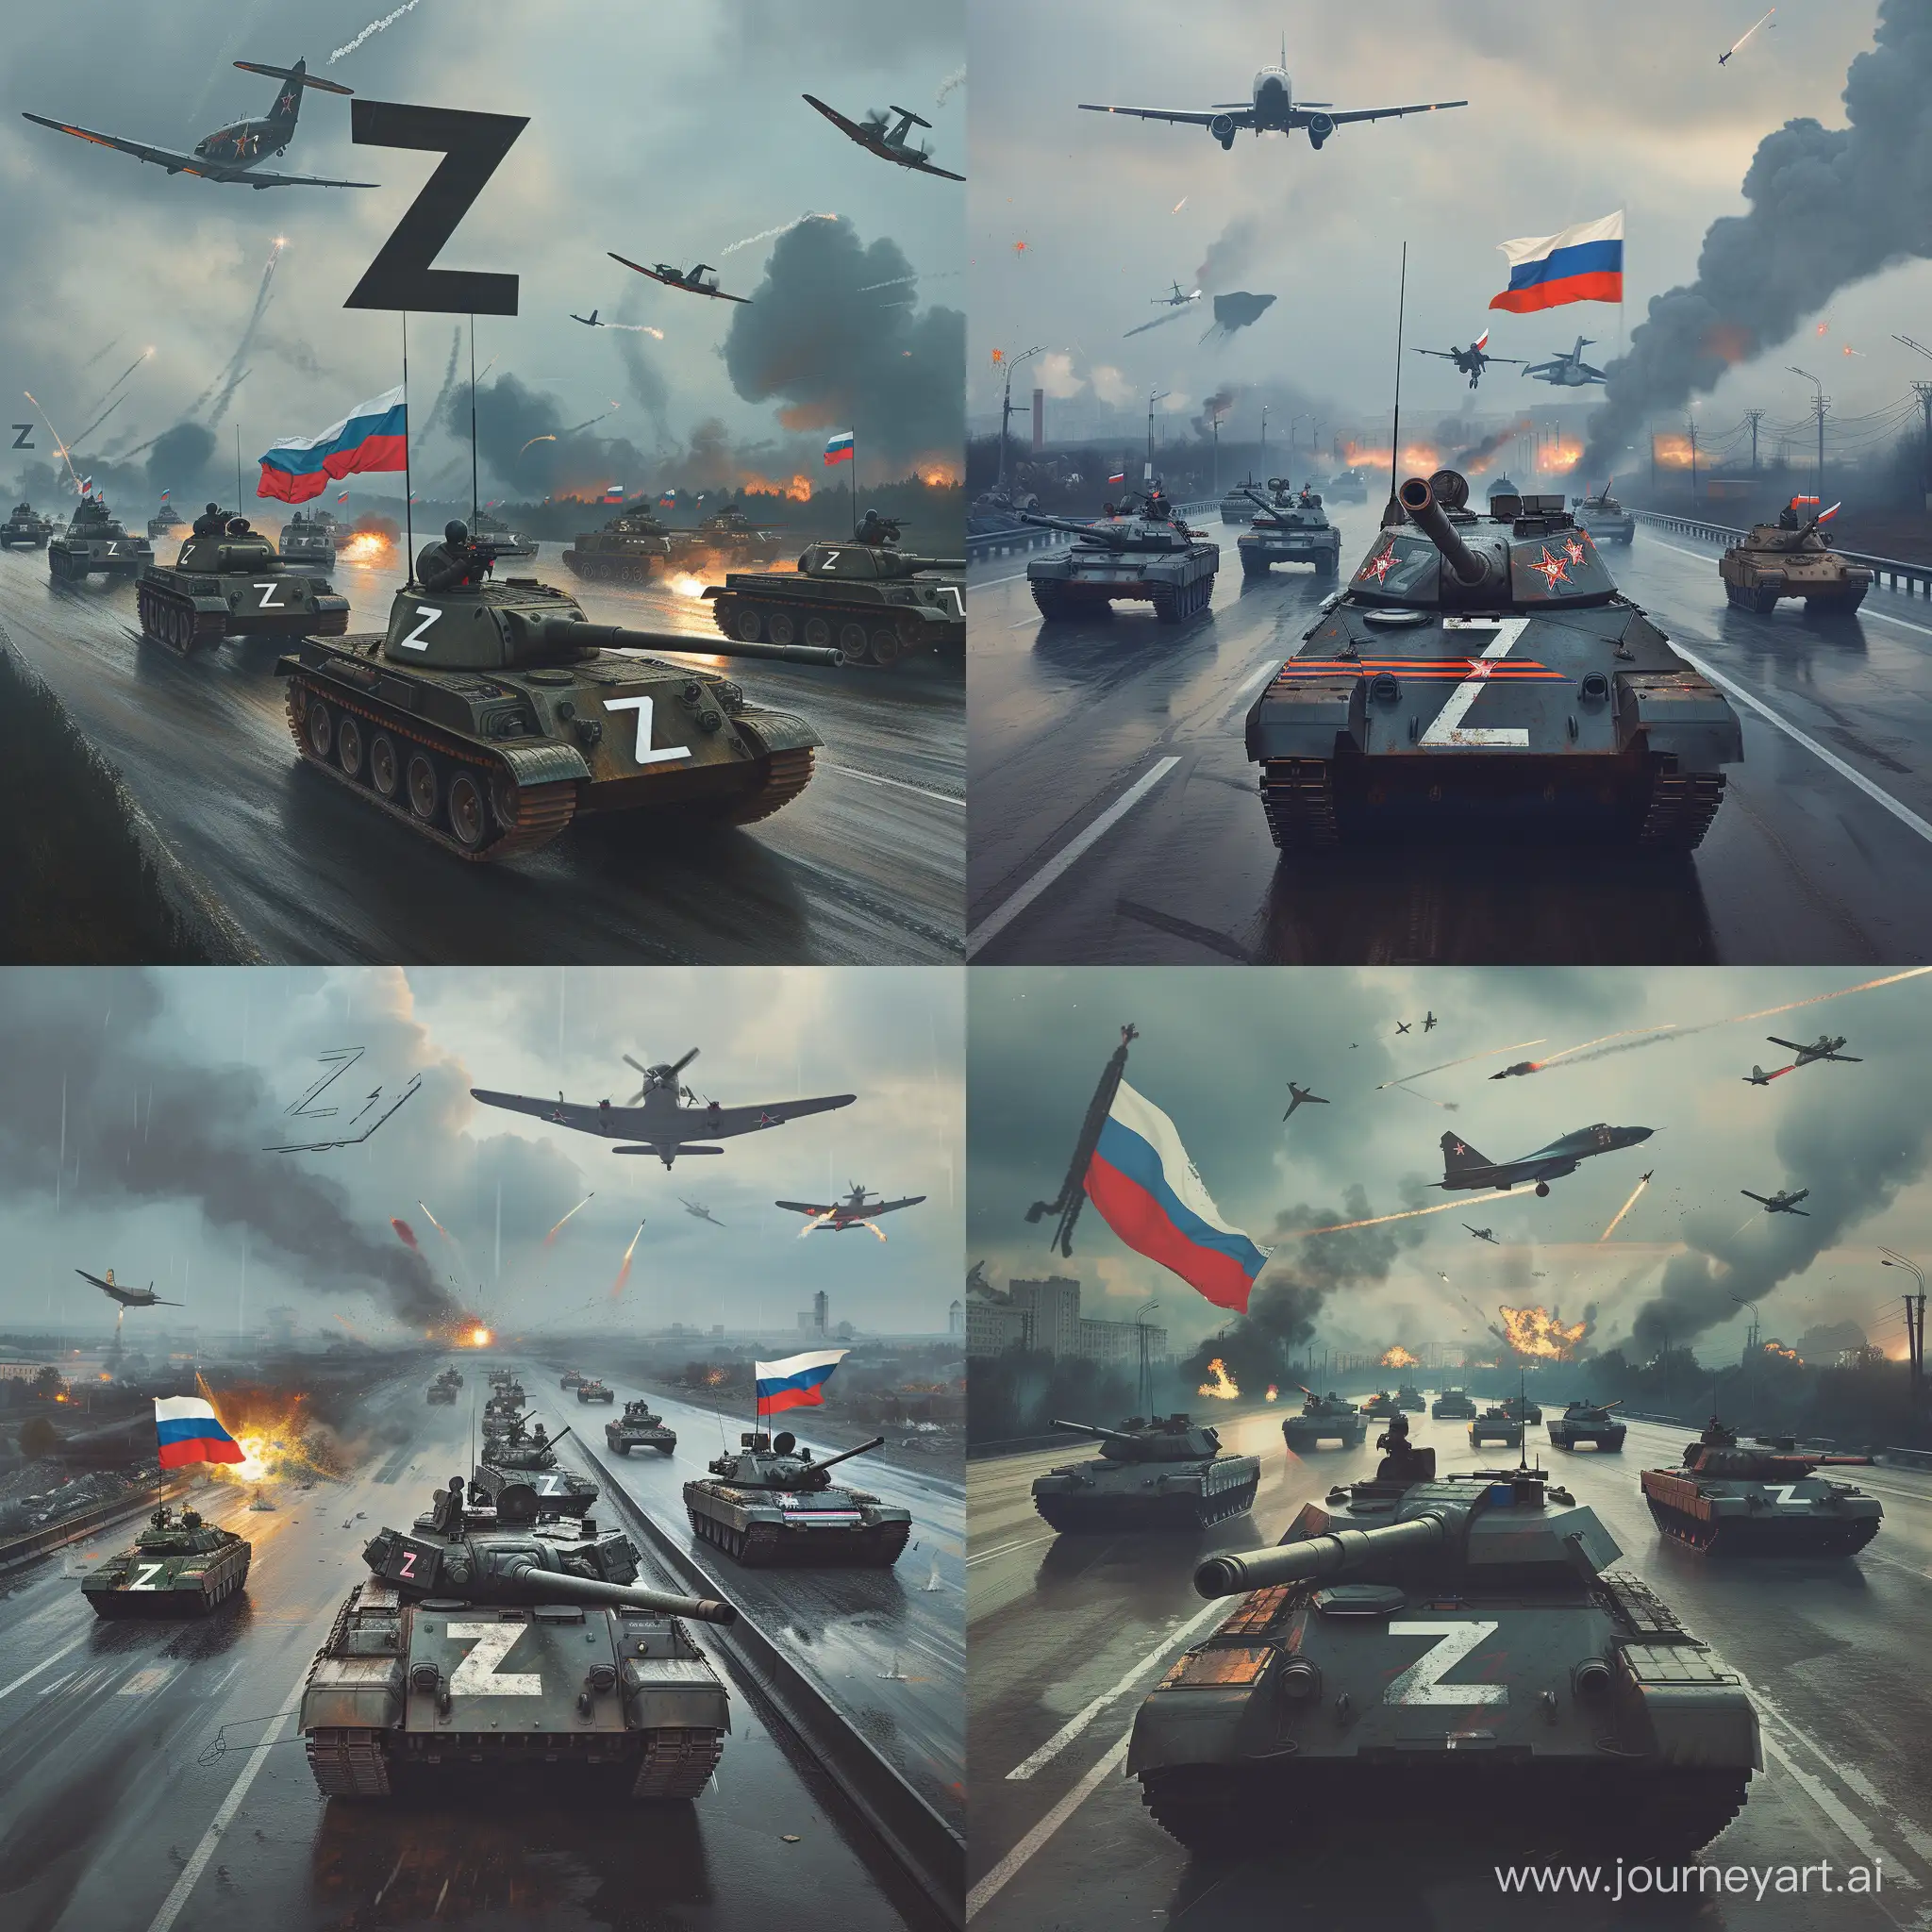 Russian-Military-Convoy-with-Z-Marked-Tanks-Amidst-Overcast-Weather-and-Explosions